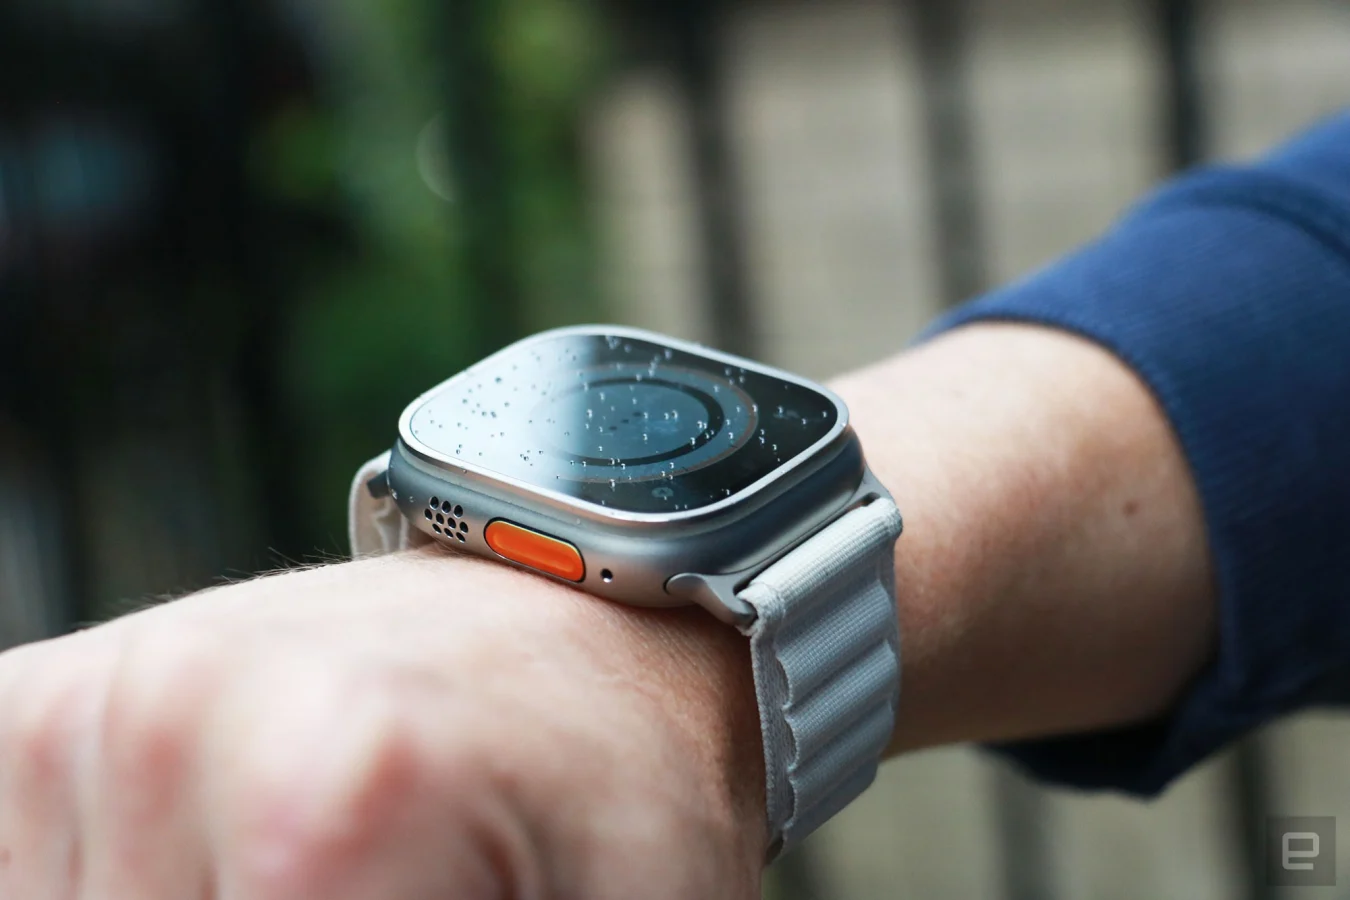 Off-angle view of the Apple Watch Ultra with alpine loop on a person's wrist. From this perspective, the orange Action button and speaker grill on the left edge are in view, while the screen's contents are dim.